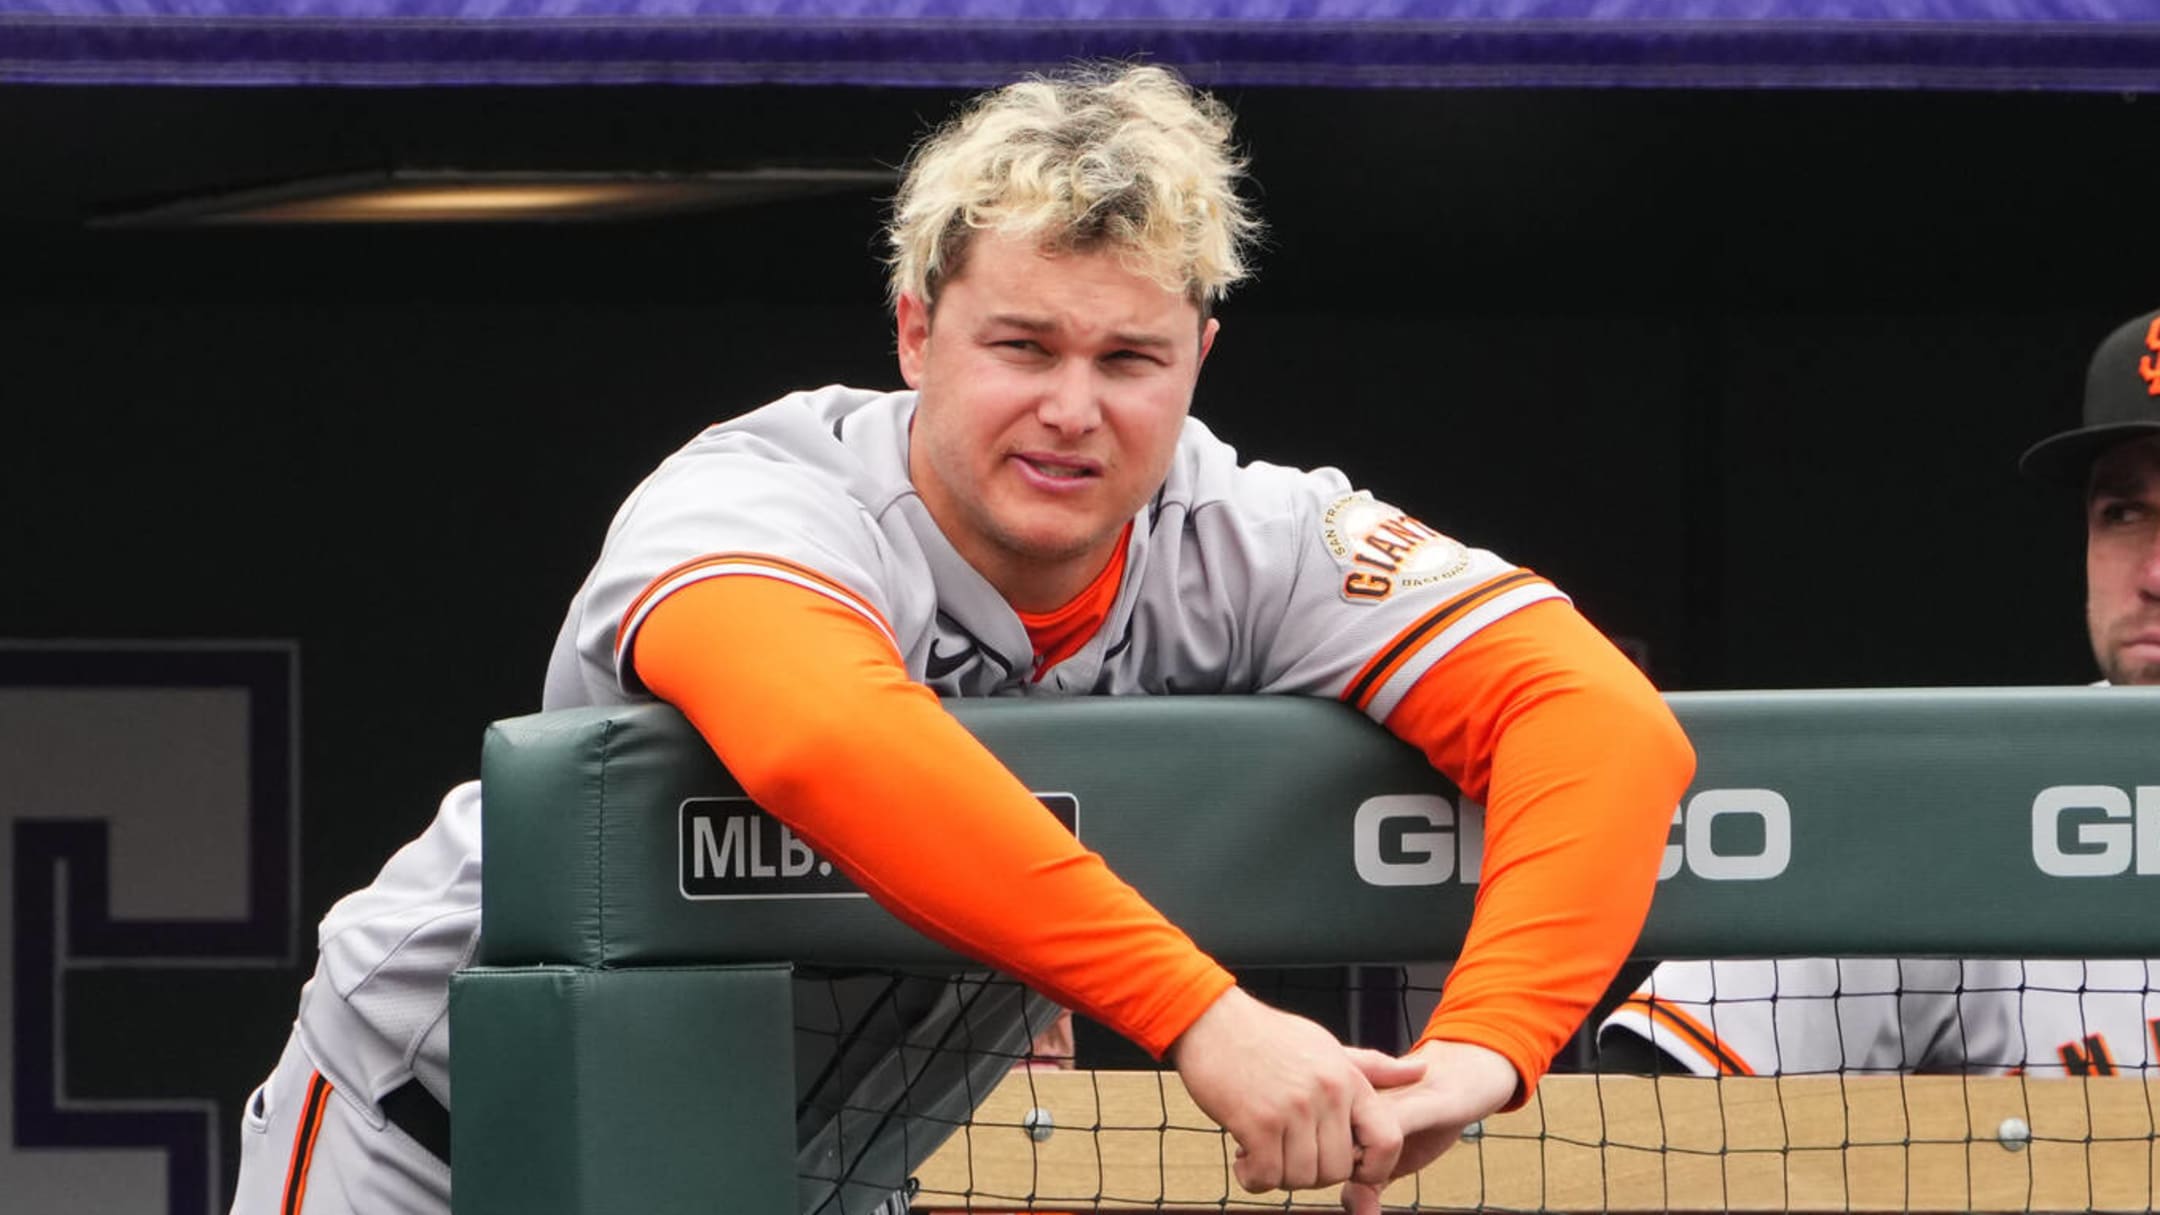 Joc Pederson returns to Giants after accepting $19.65M qualifying